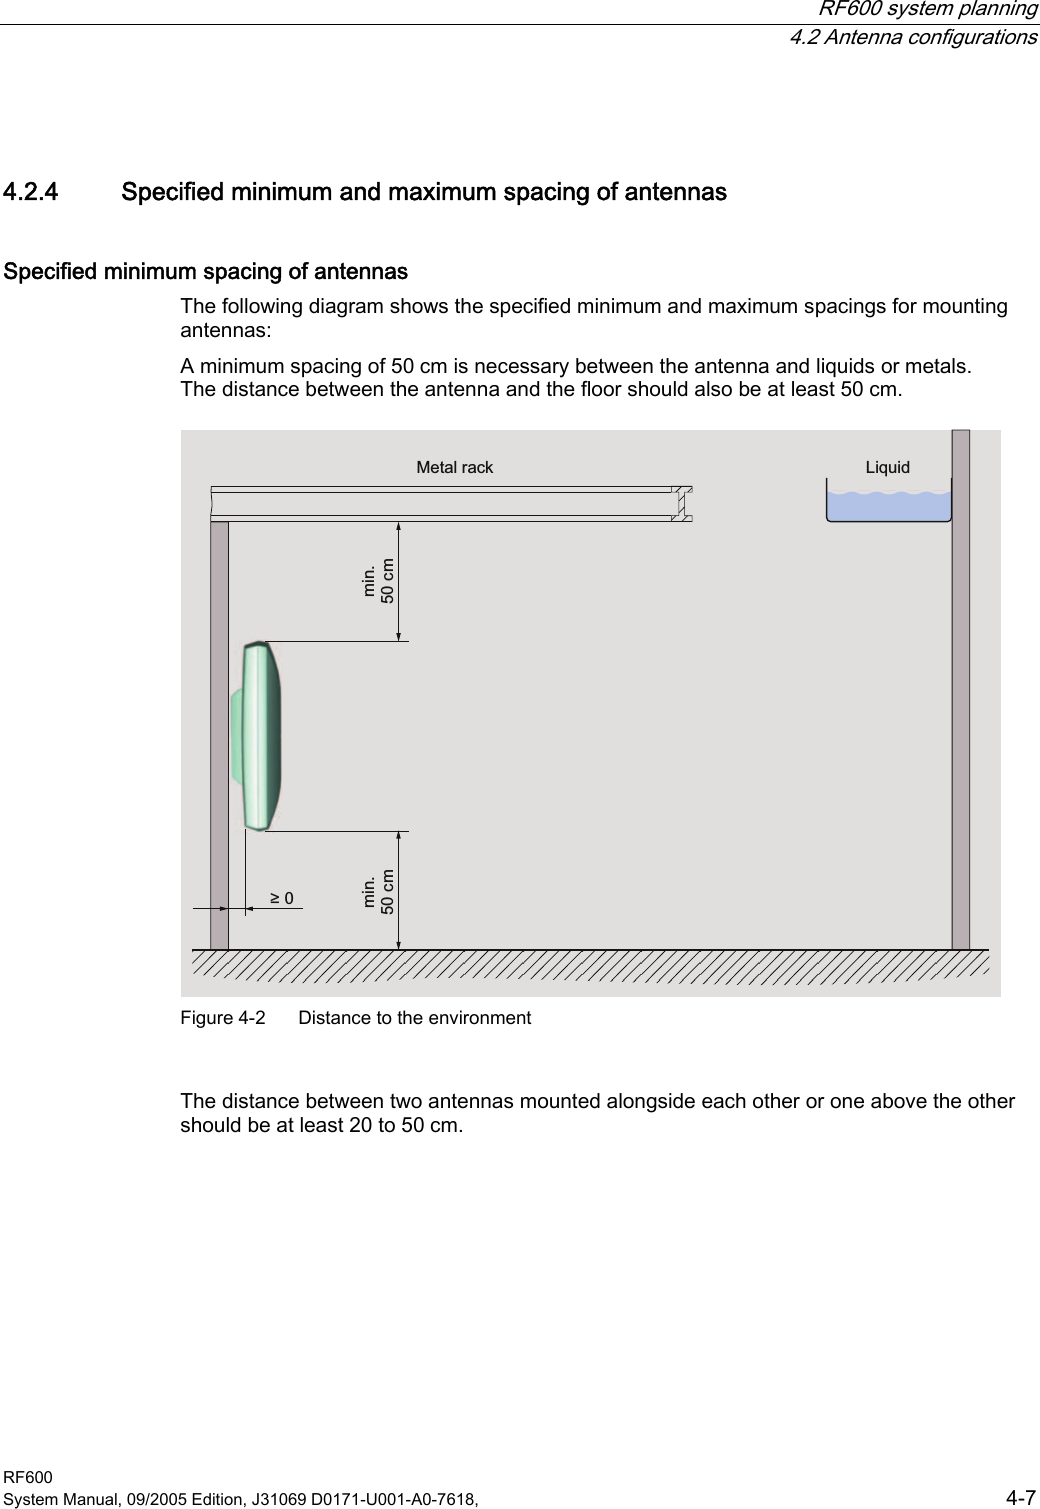  RF600 system planning  4.2 Antenna configurations RF600 System Manual, 09/2005 Edition, J31069 D0171-U001-A0-7618,    4-7 4.2.4 Specified minimum and maximum spacing of antennas Specified minimum spacing of antennas The following diagram shows the specified minimum and maximum spacings for mounting antennas:  A minimum spacing of 50 cm is necessary between the antenna and liquids or metals. The distance between the antenna and the floor should also be at least 50 cm. PLQFPPLQFPุ0HWDOUDFN /LTXLG Figure 4-2  Distance to the environment  The distance between two antennas mounted alongside each other or one above the other should be at least 20 to 50 cm. 